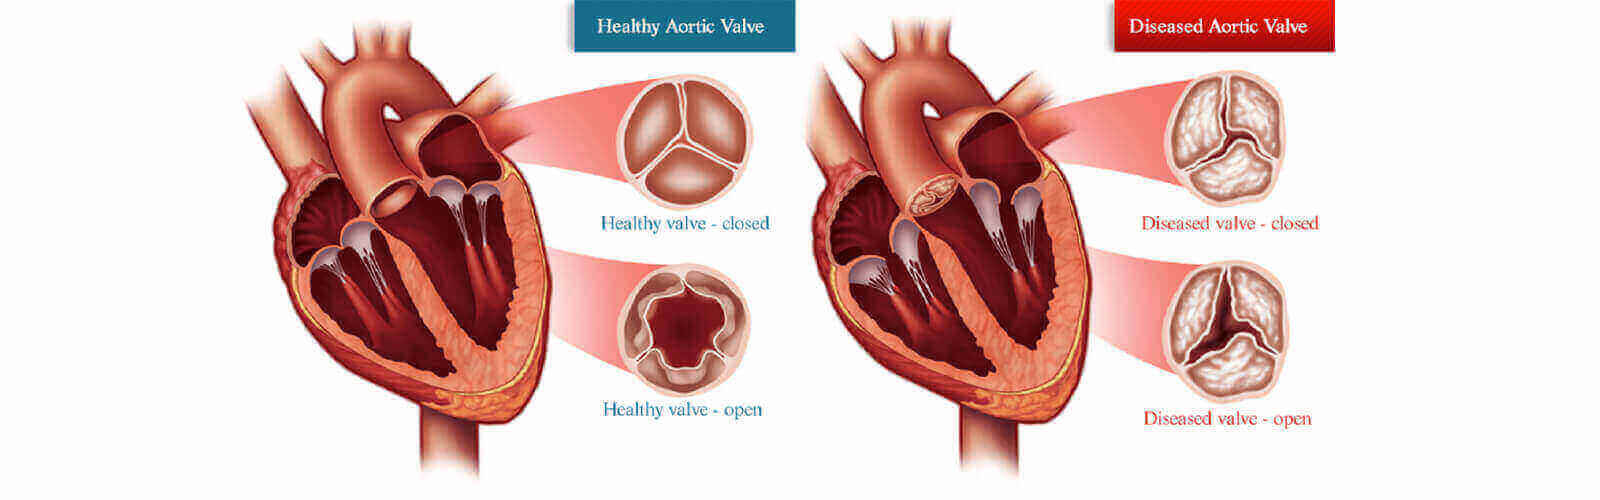 Heart Valve Replacement Surgery in Ivory Coast